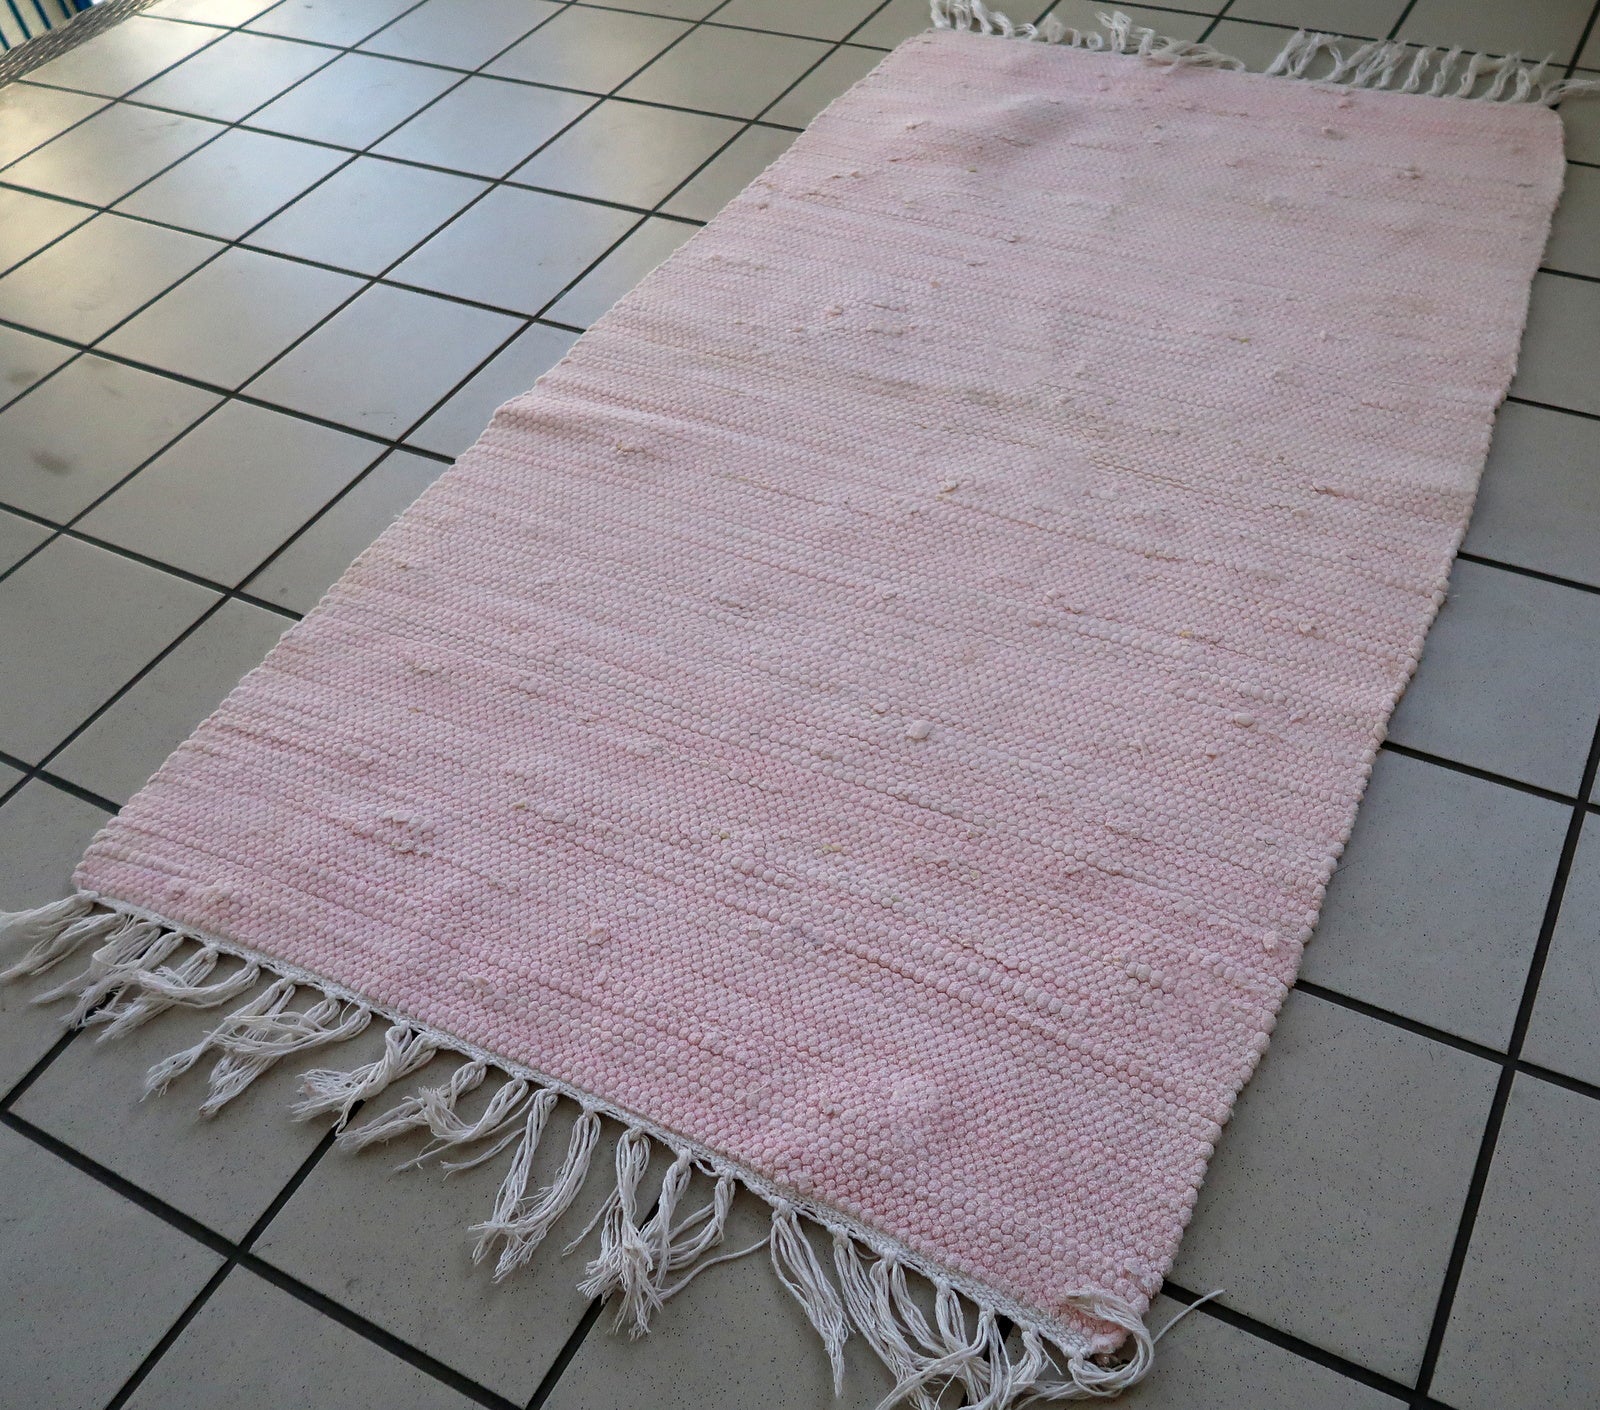 Handmade vintage kilim in original good condition. The kilim is in pink shade. It has been made out of cotton. Vert simple, plain design.